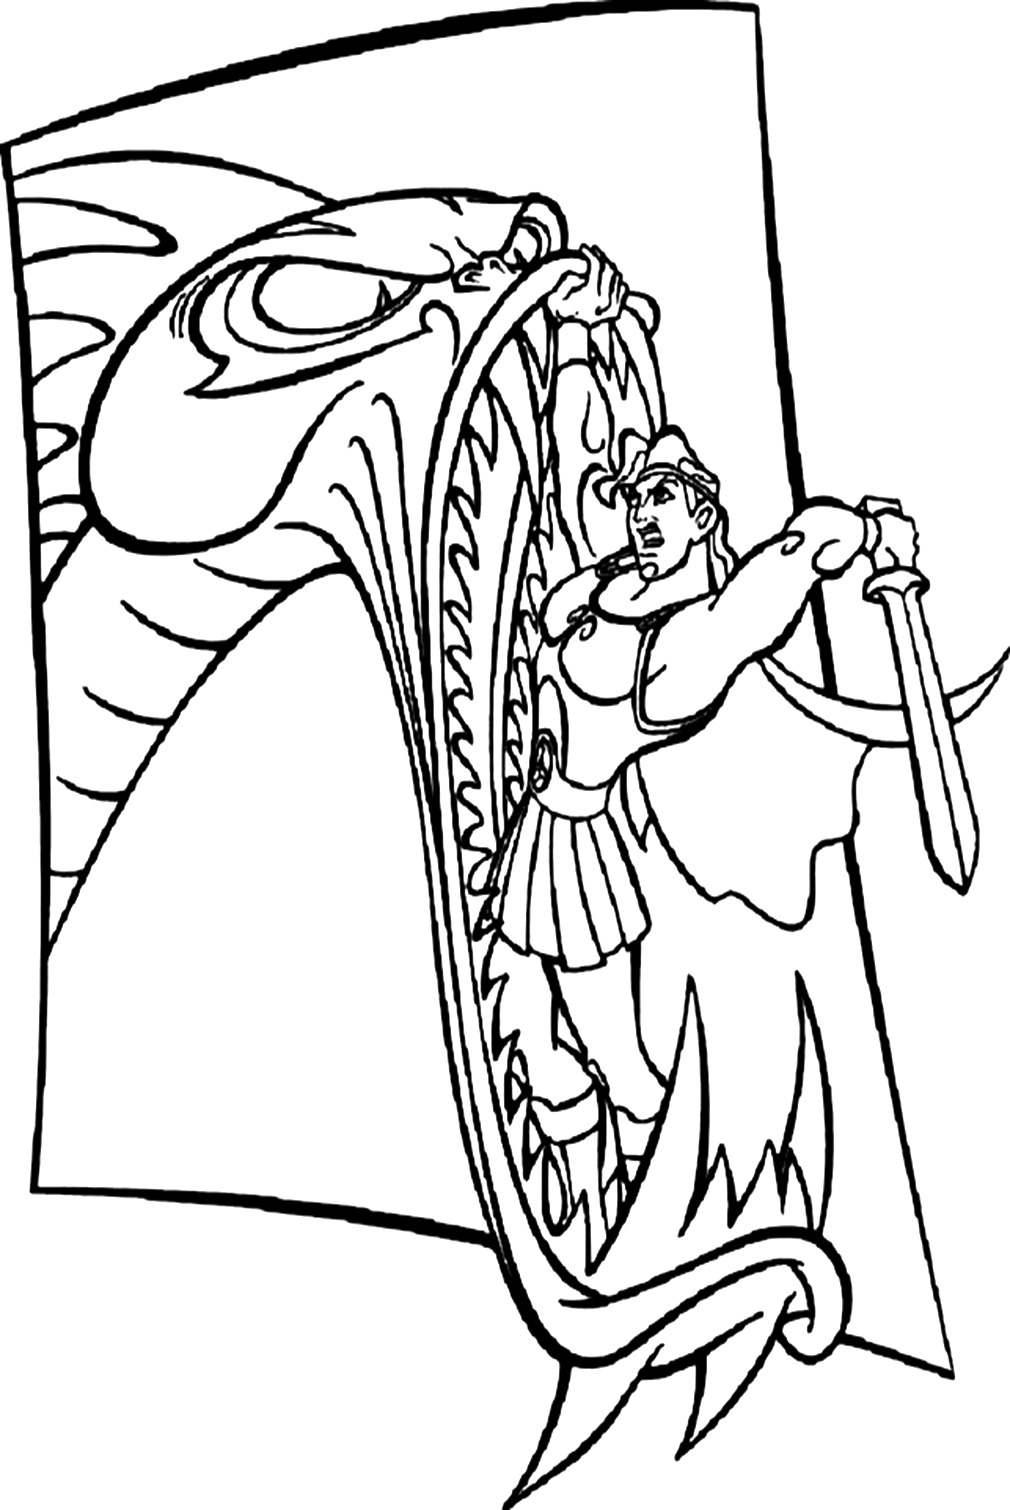 Hydra Coloring Sheet Coloring Page